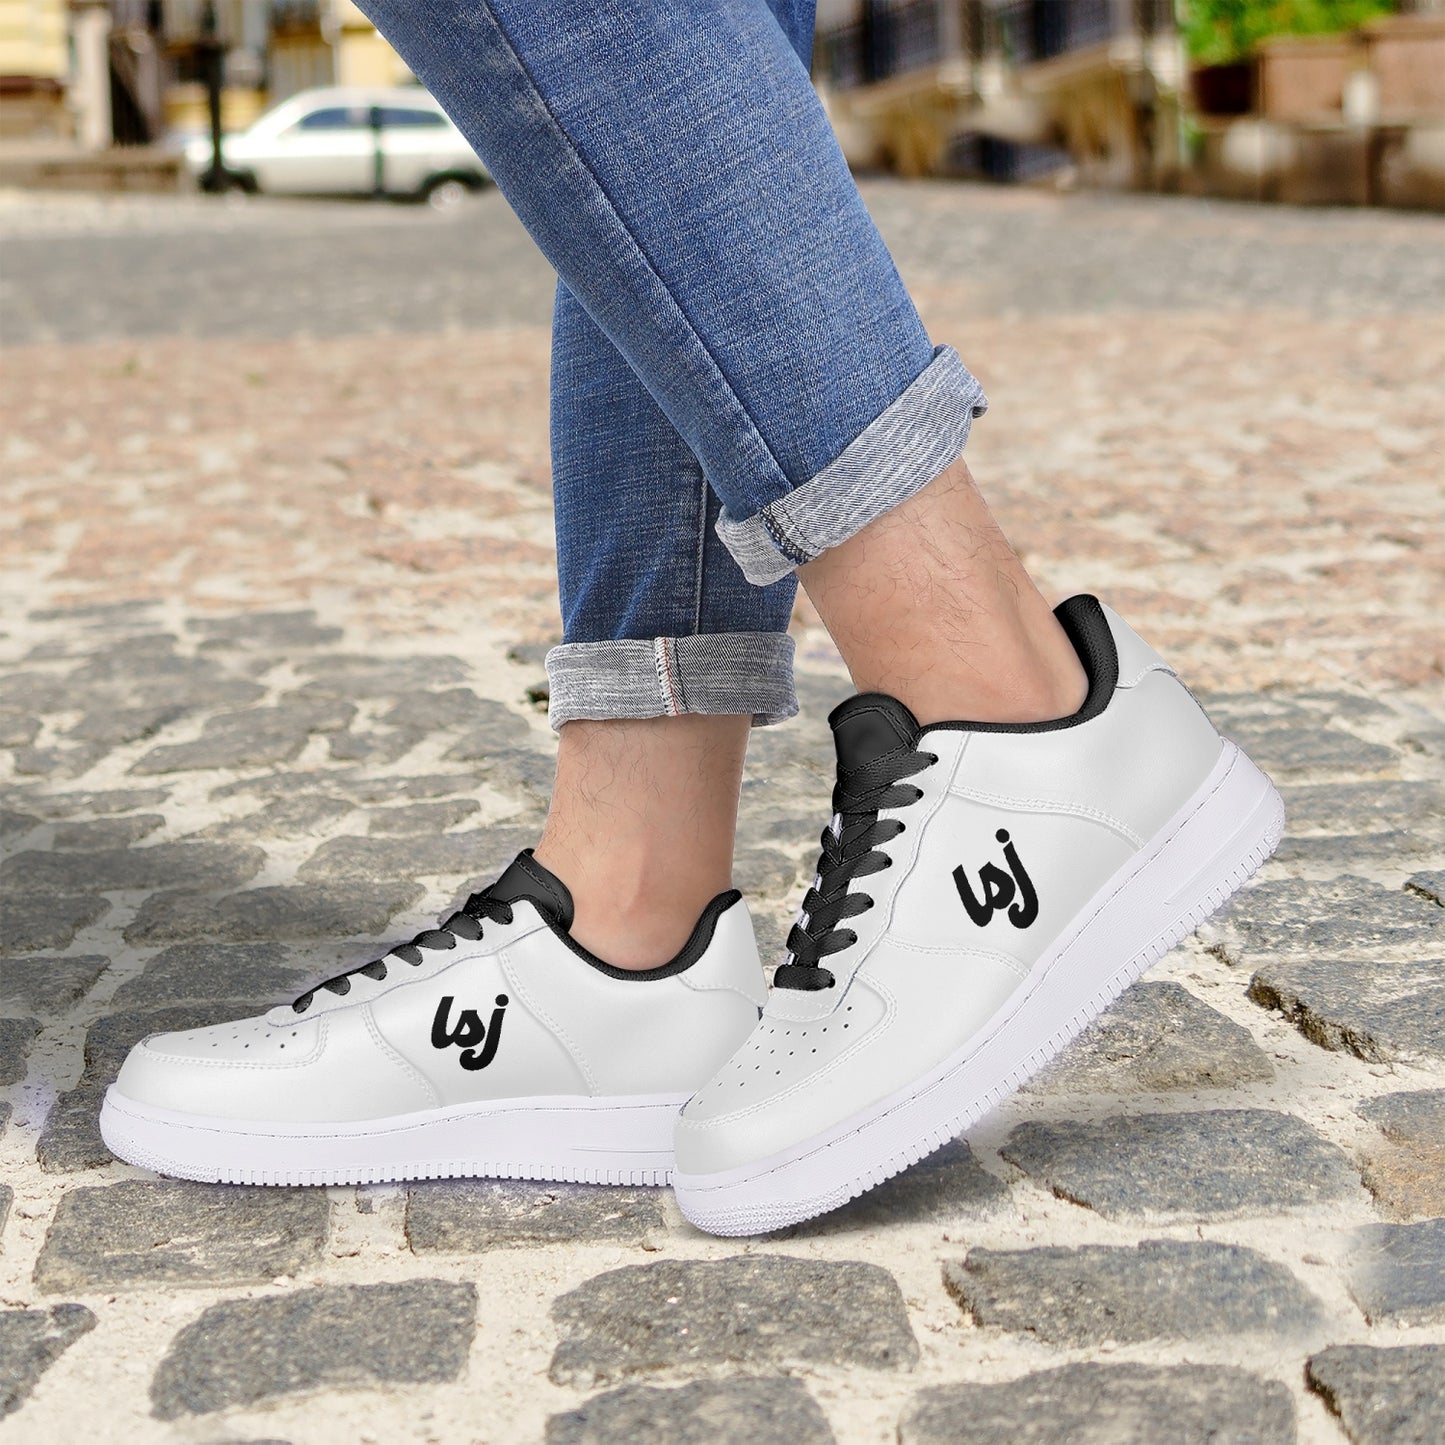 LSJ Basic White Low-Top Leather Sports Sneakers